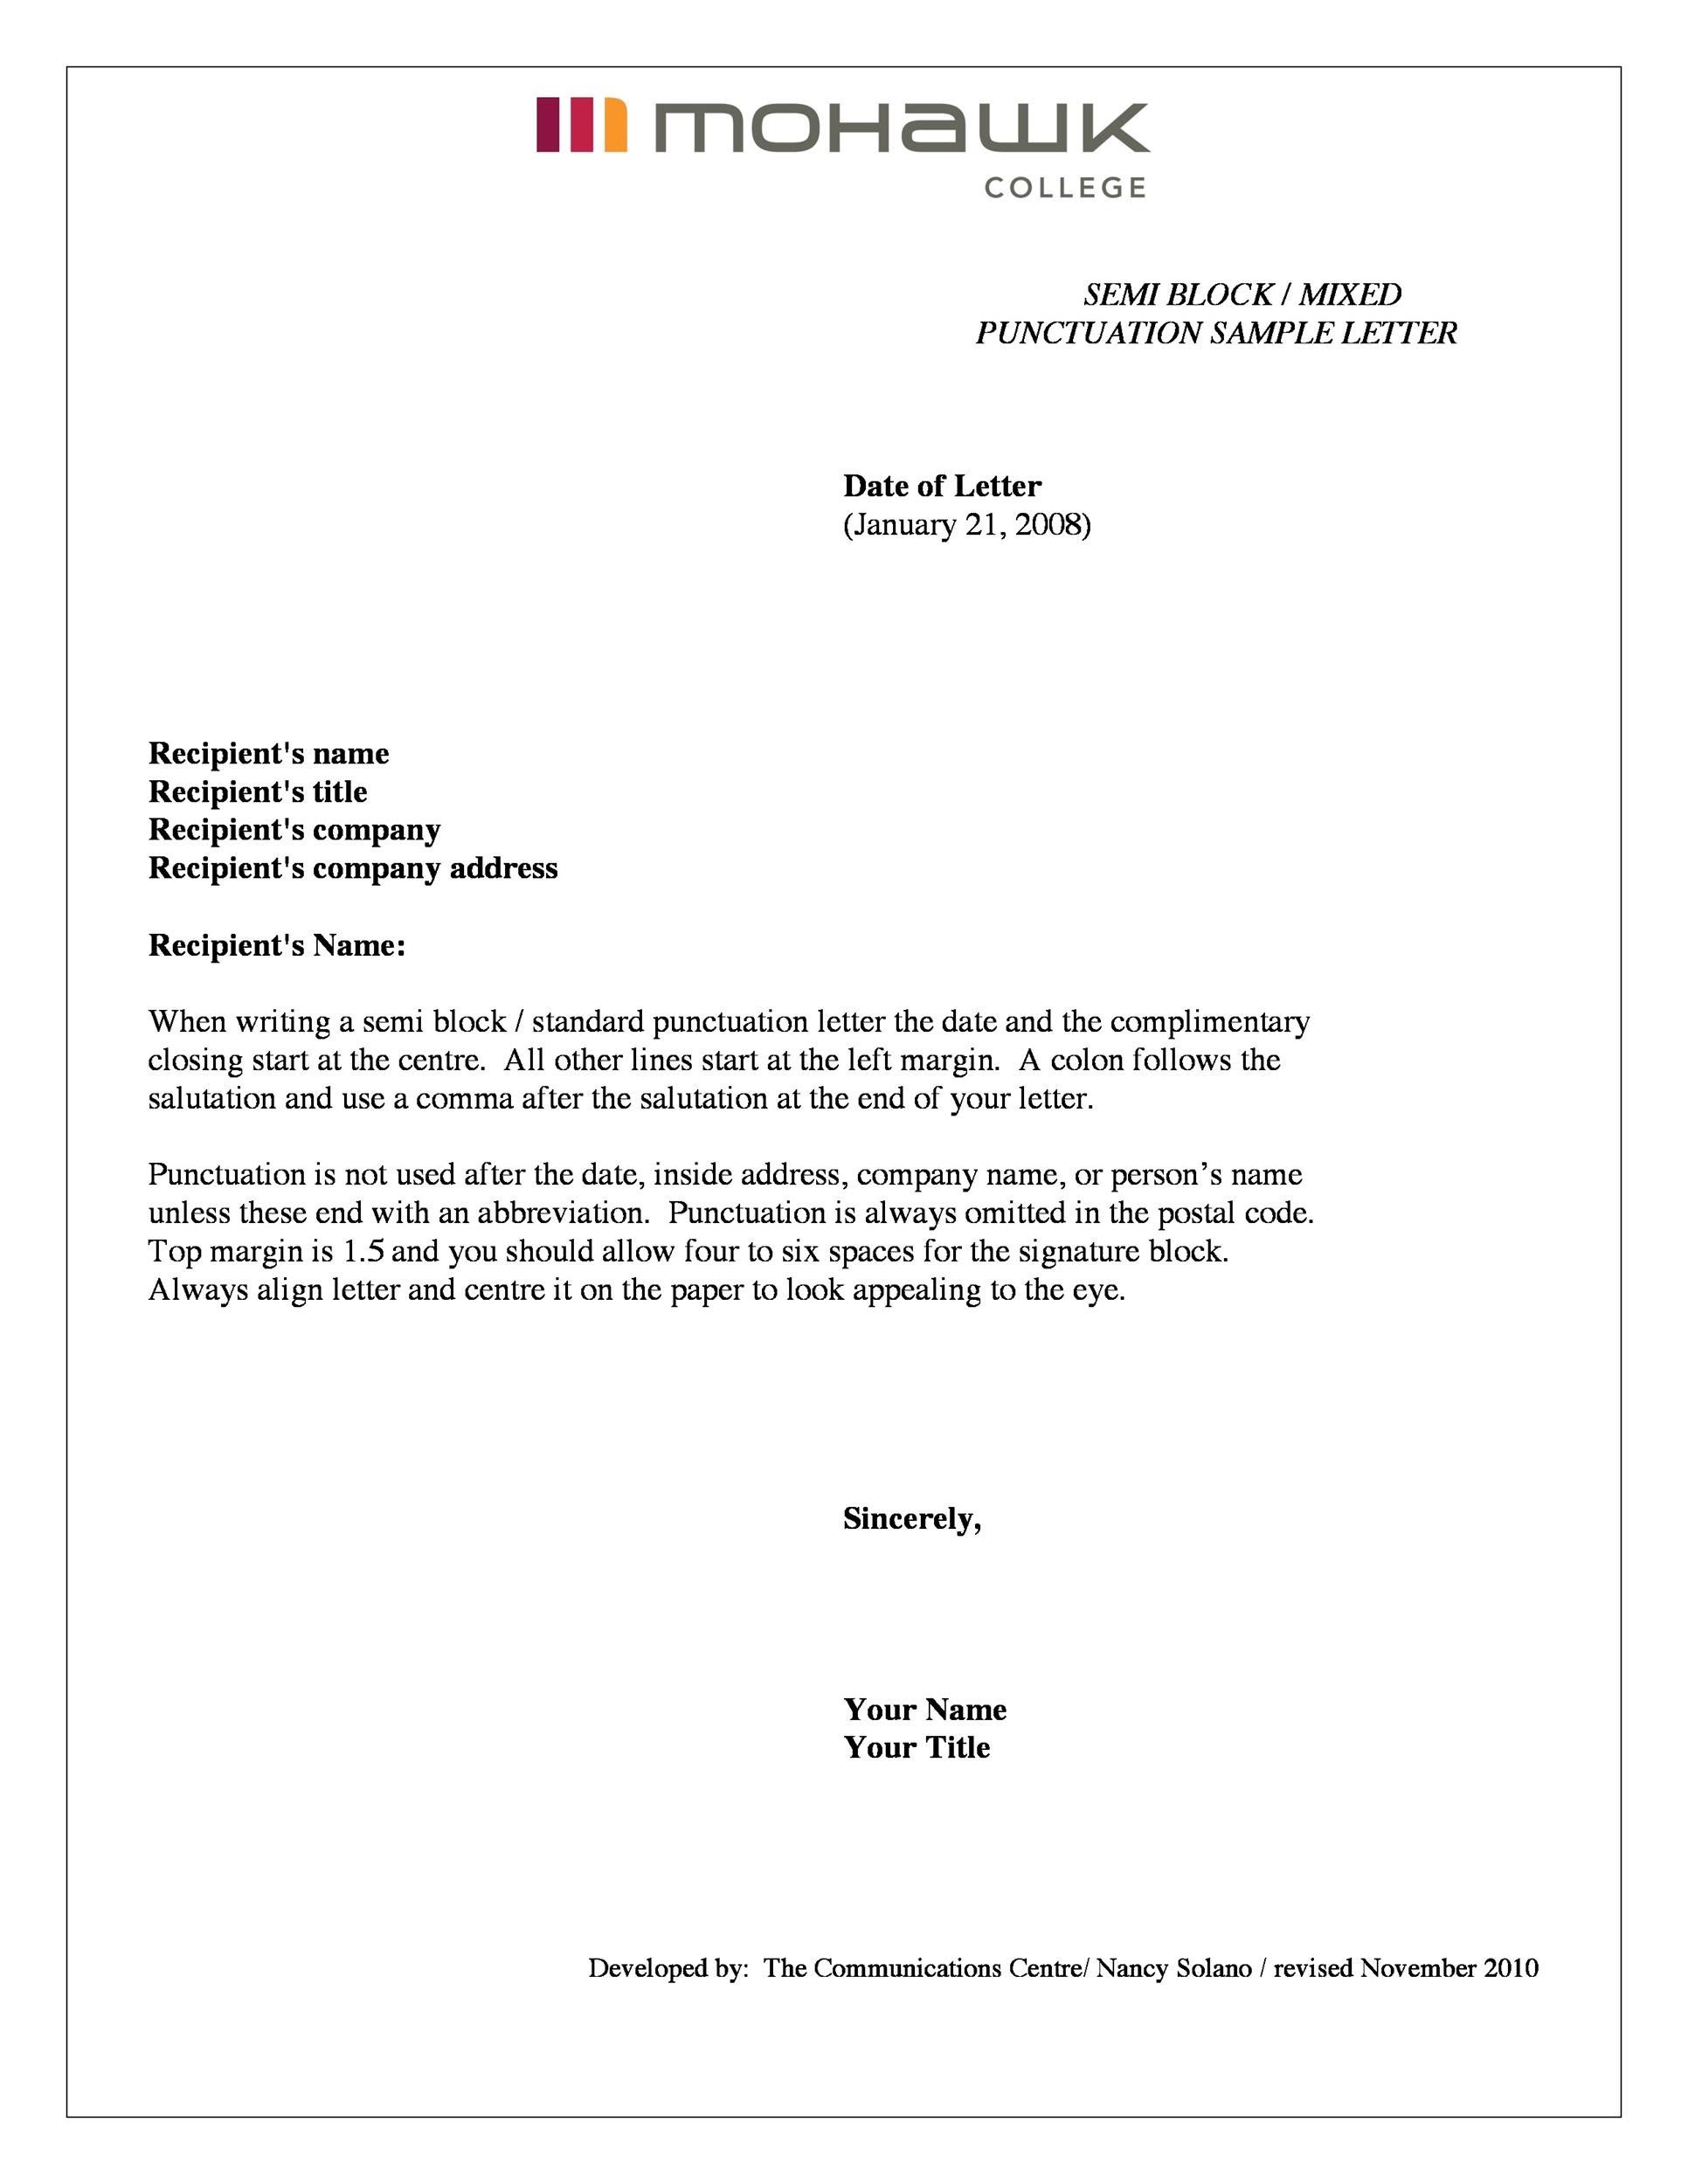 Complimentary Closing Of A Business Letter